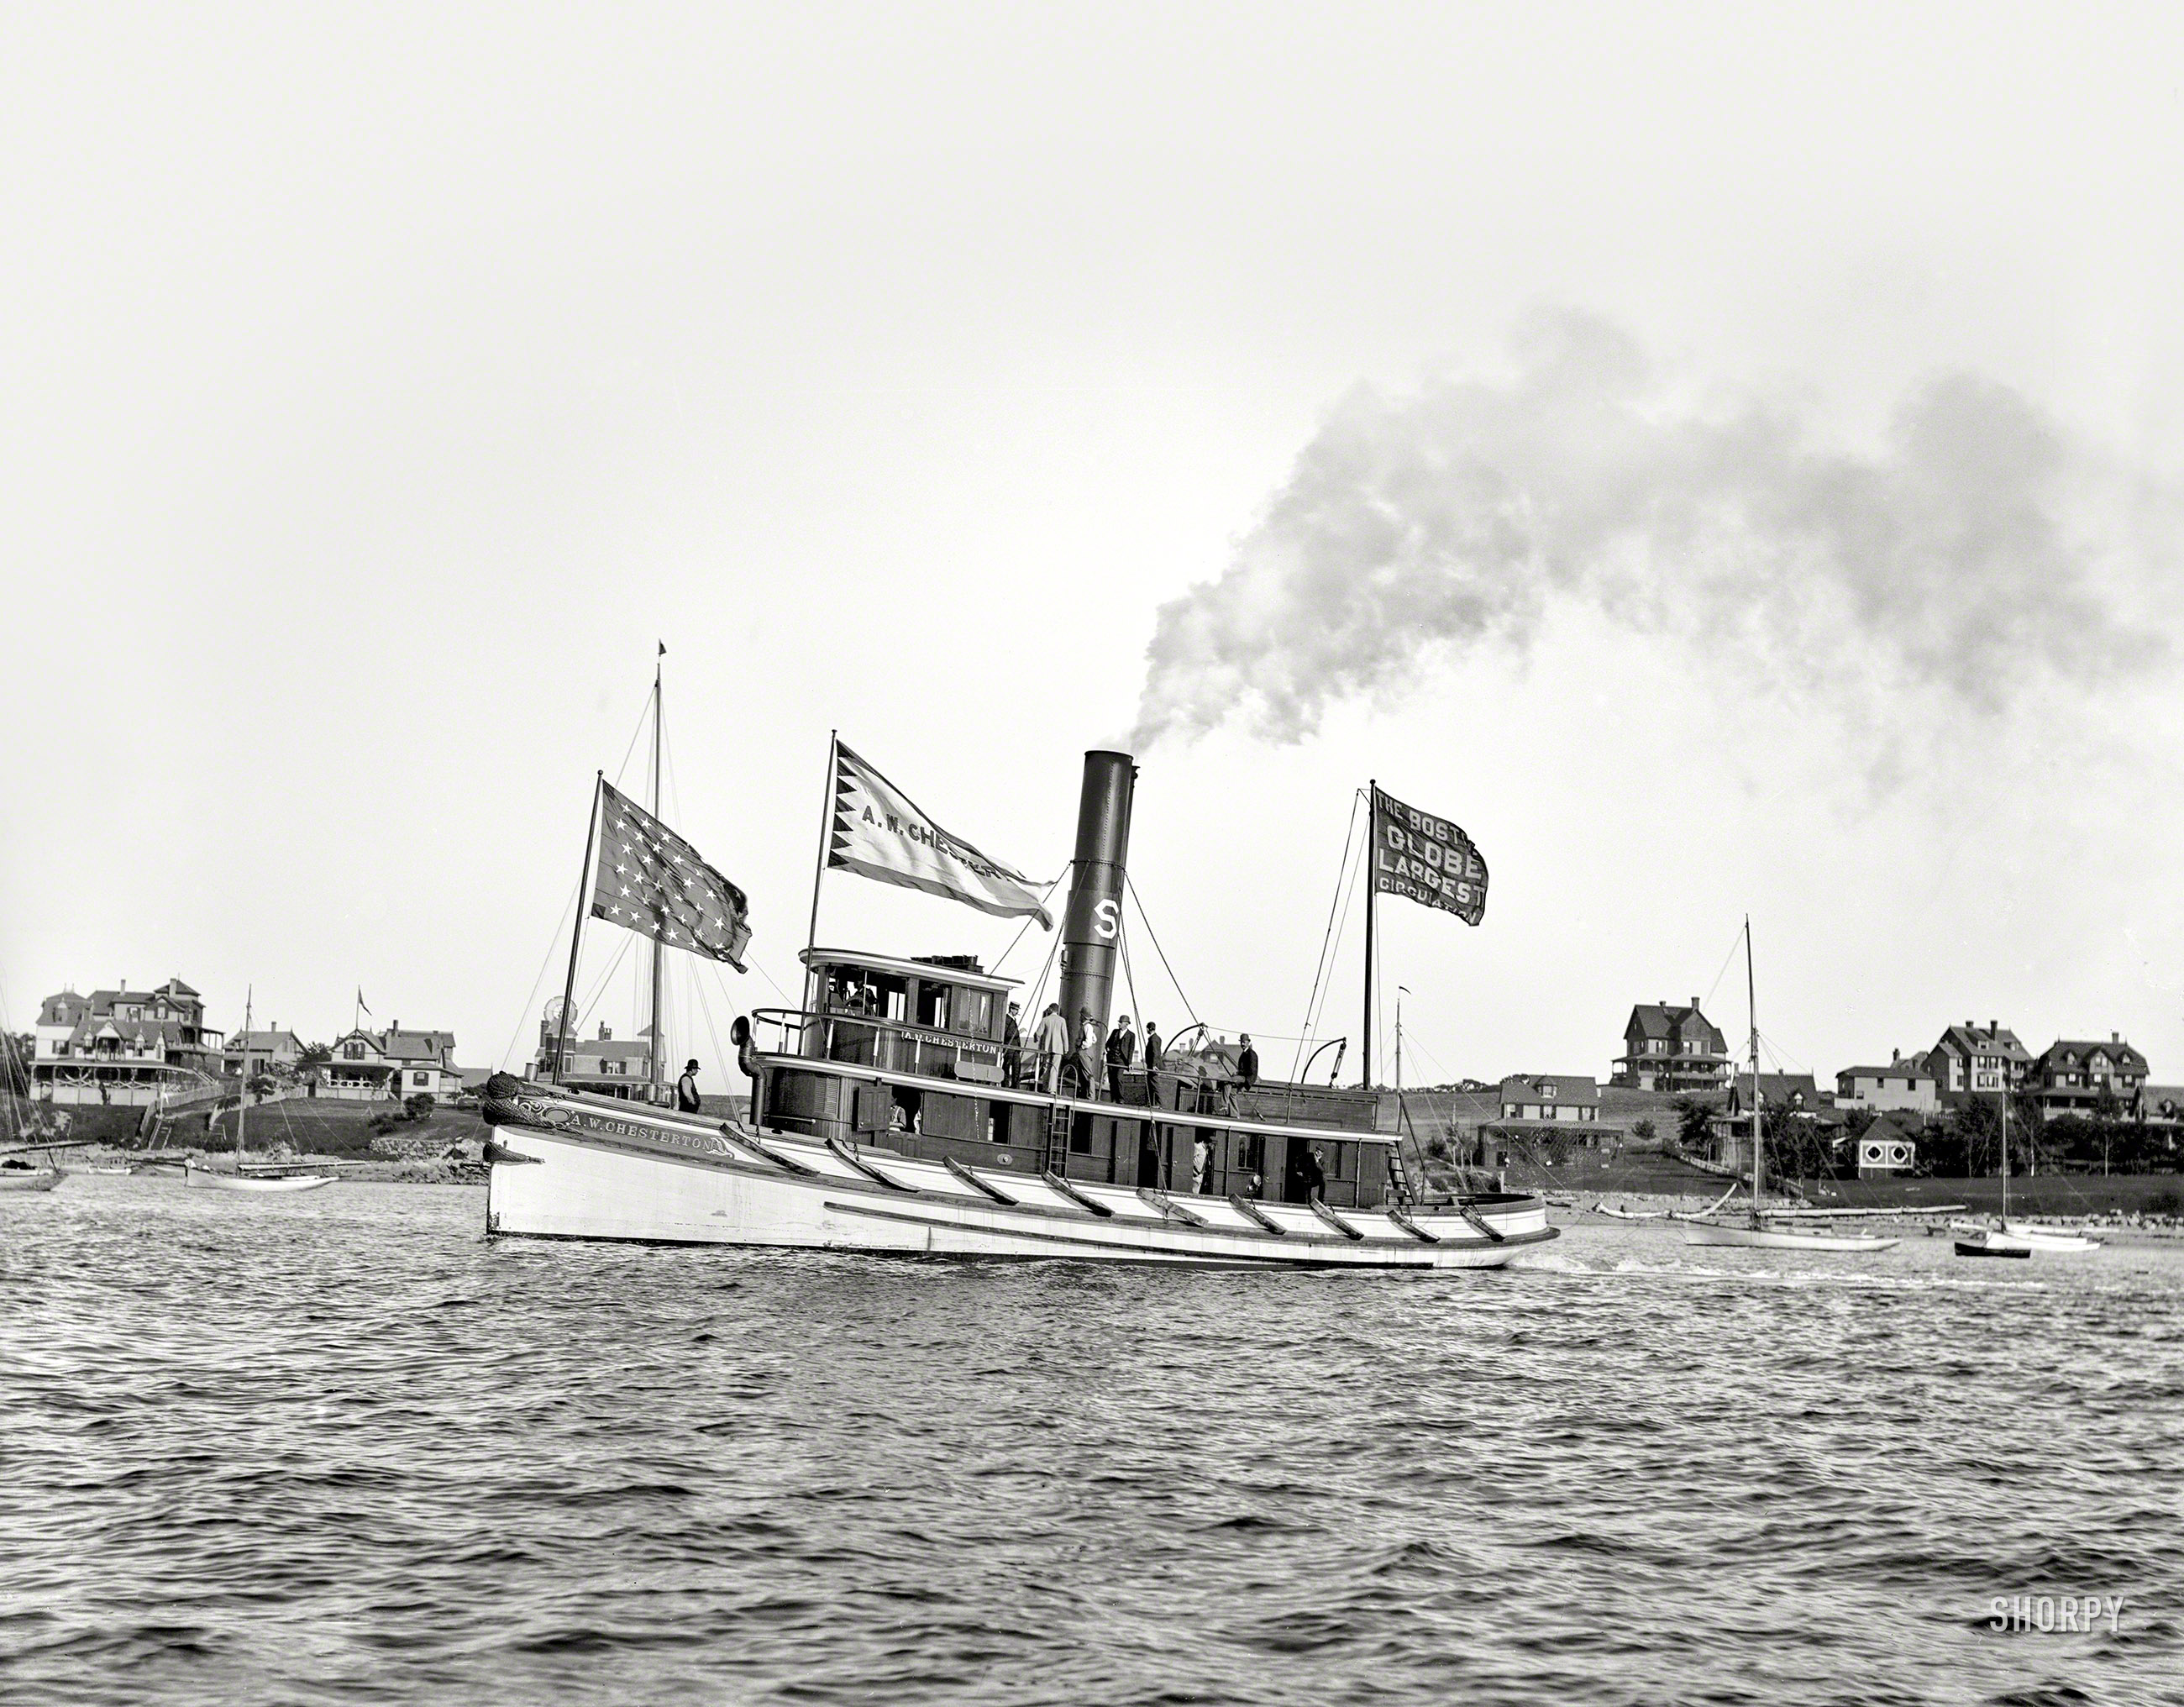 Circa 1899. "Steamboat A.W. Chesterton." Brought to you by the Boston Globe. 8x10 inch dry plate glass negative, Detroit Publishing Company. View full size.